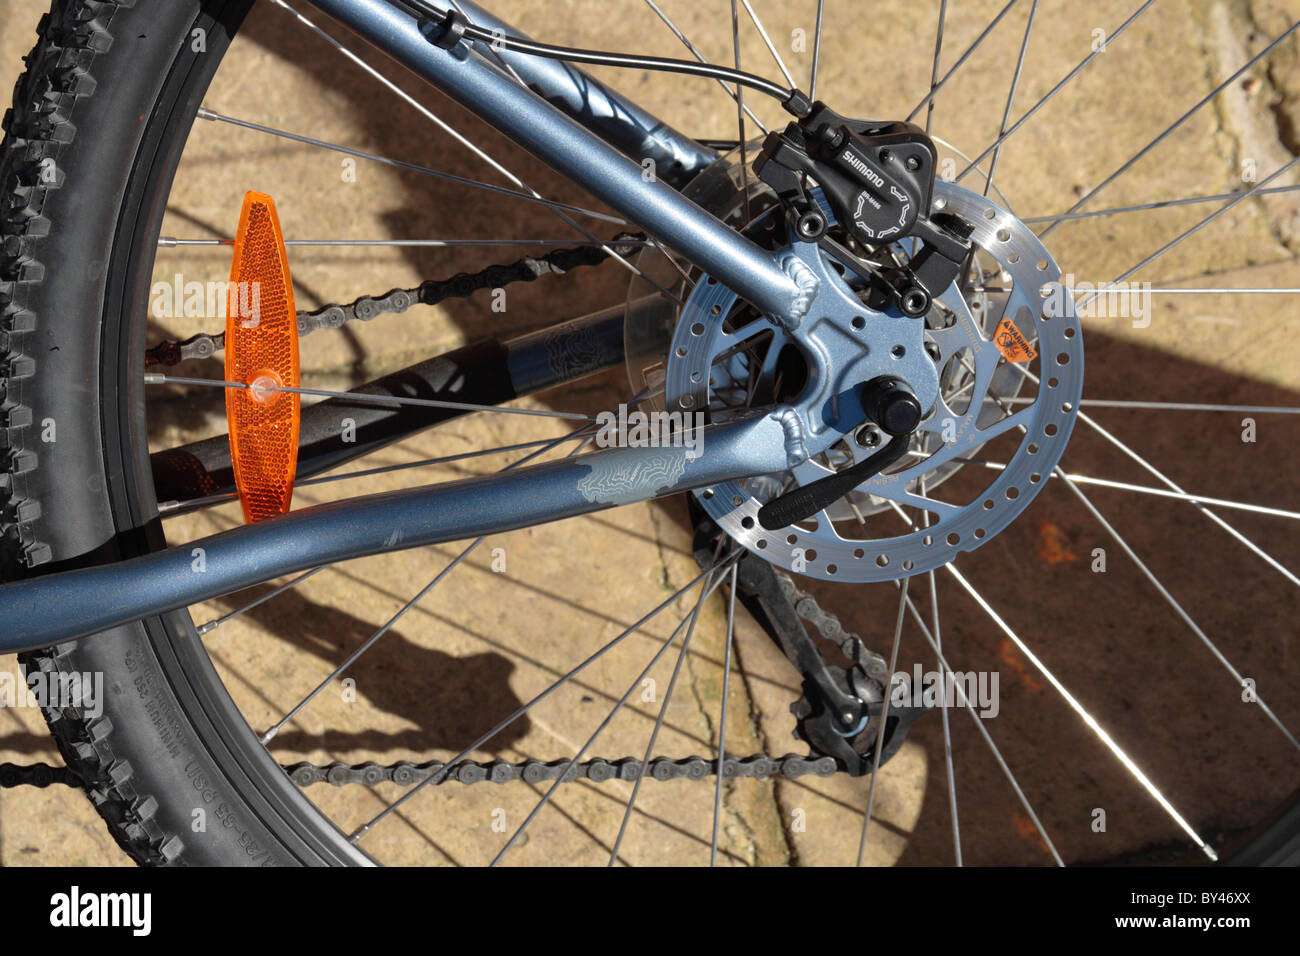 Gear, chain and brake mechanism on the rear wheel hub of a bicycle Stock Photo